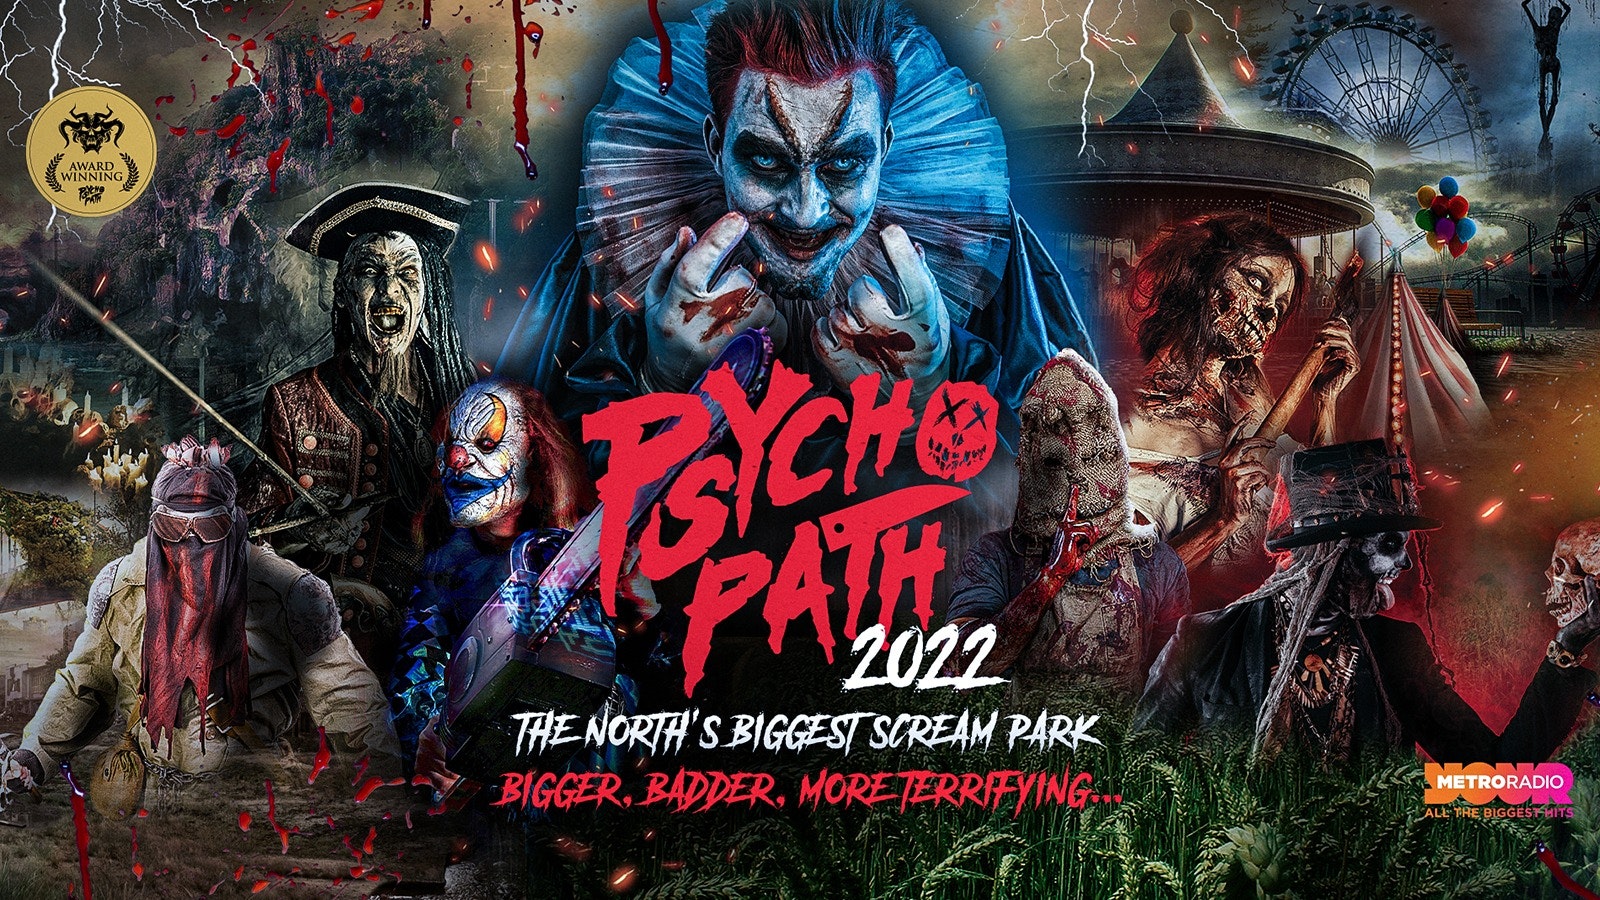 Psycho Path Presents FearGround – Oct 7th